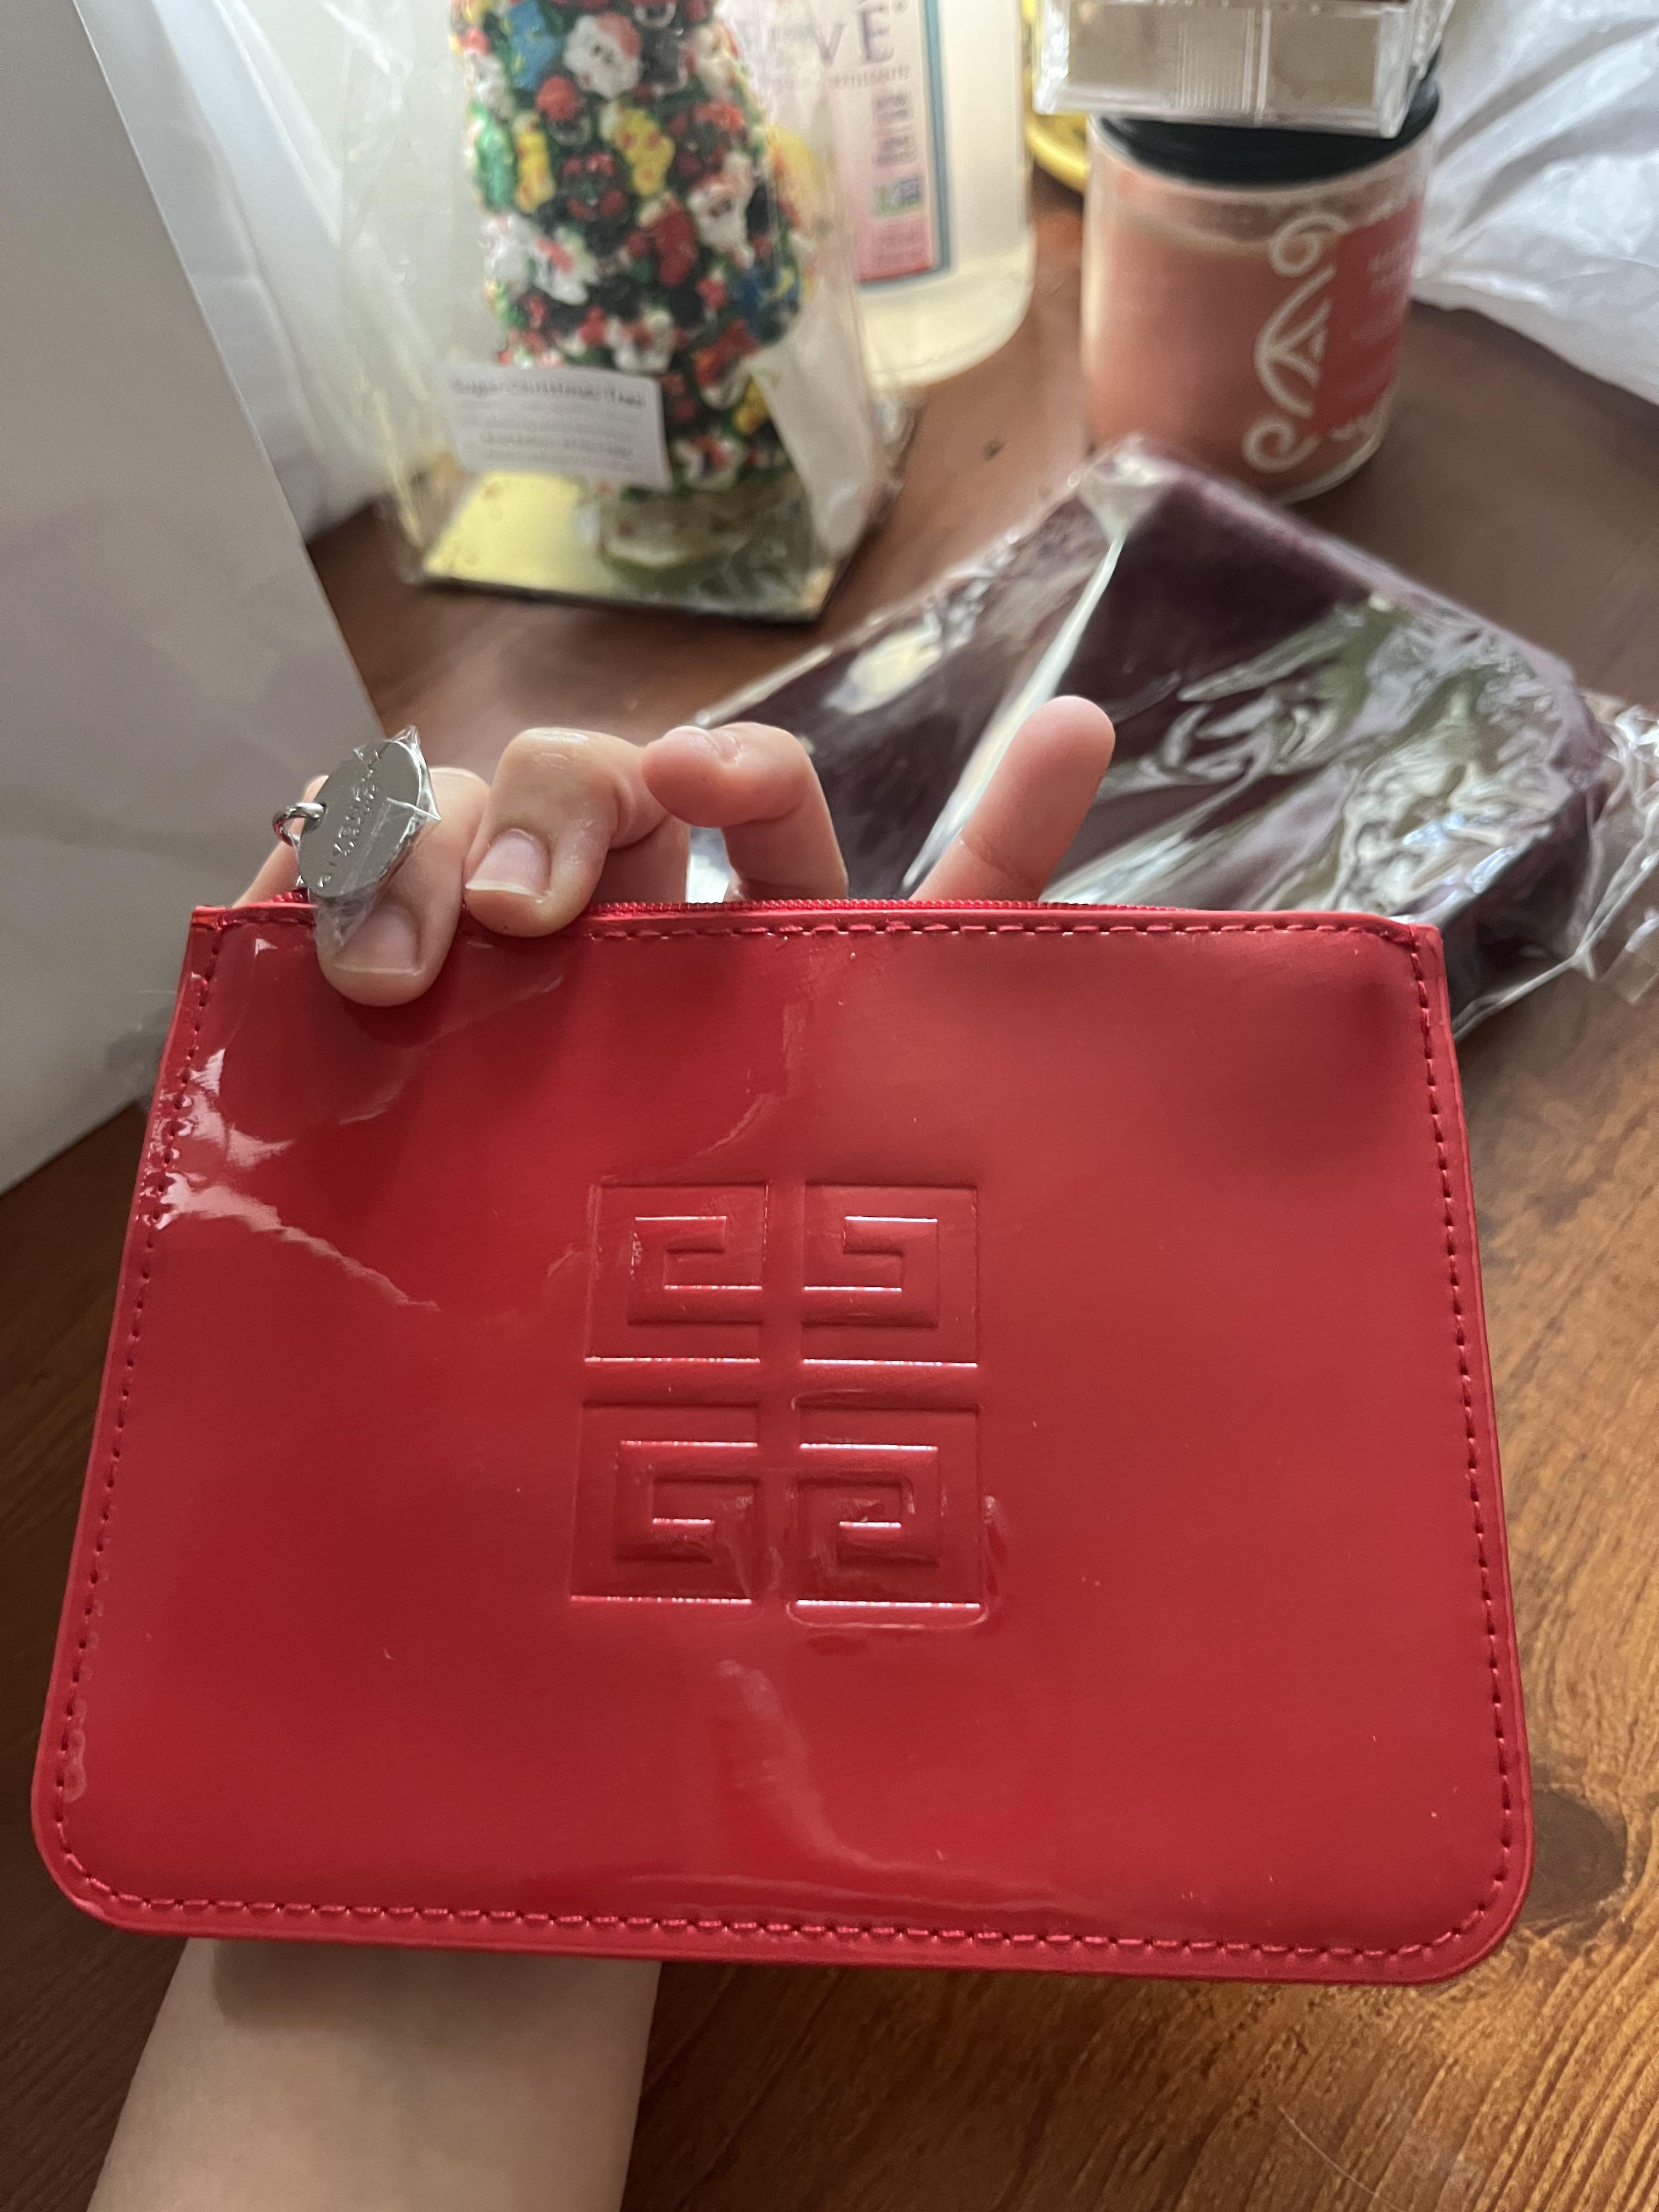 Honest thoughts on function and quality of Givenchy Pandora bag in medium?  (More in comments) : r/handbags